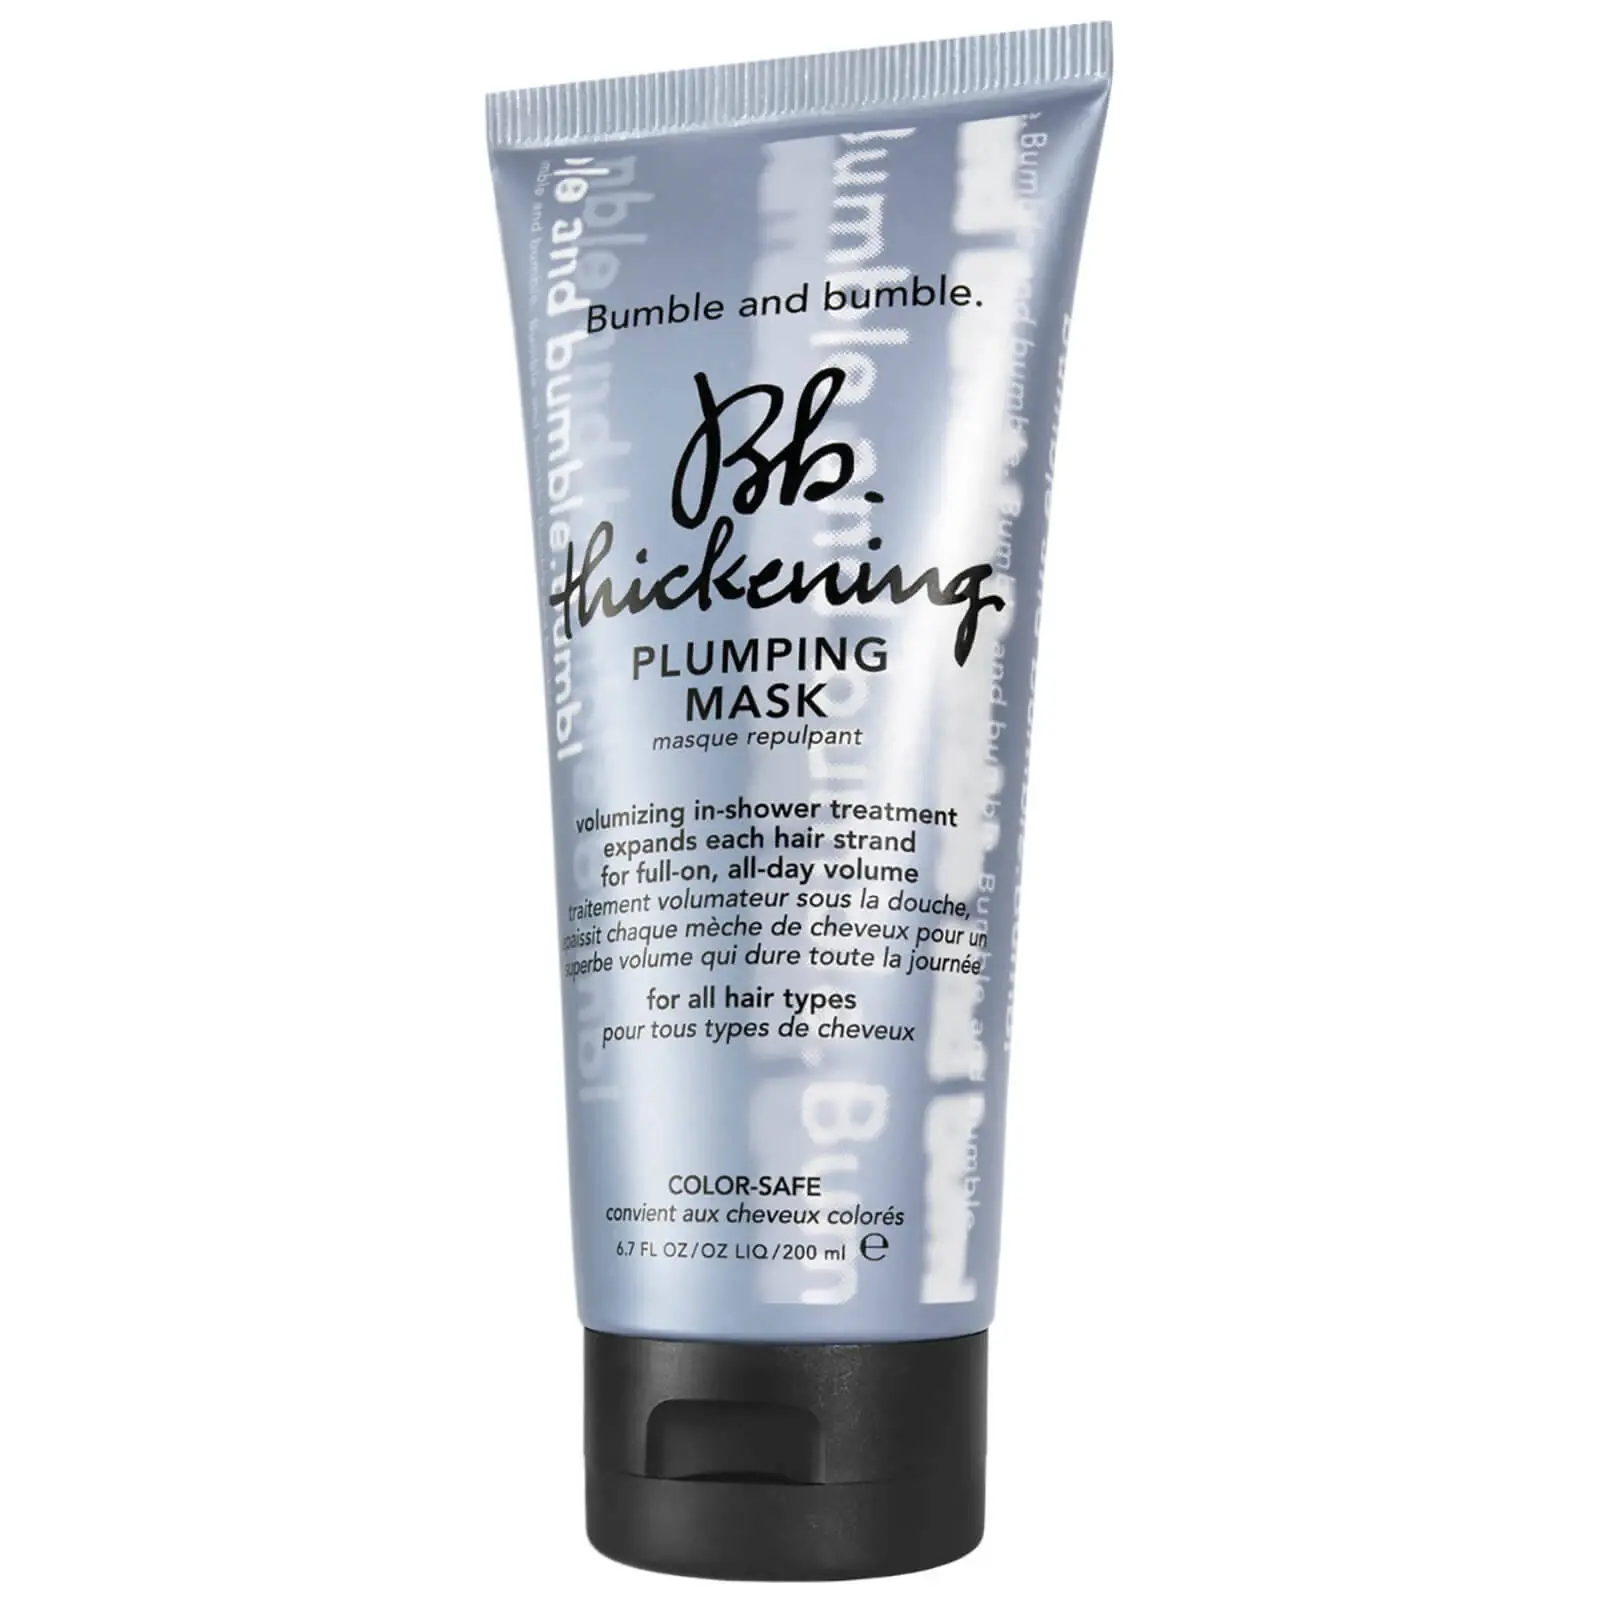 Bumble and Bumble - Thickening Plumping Mask 200ml